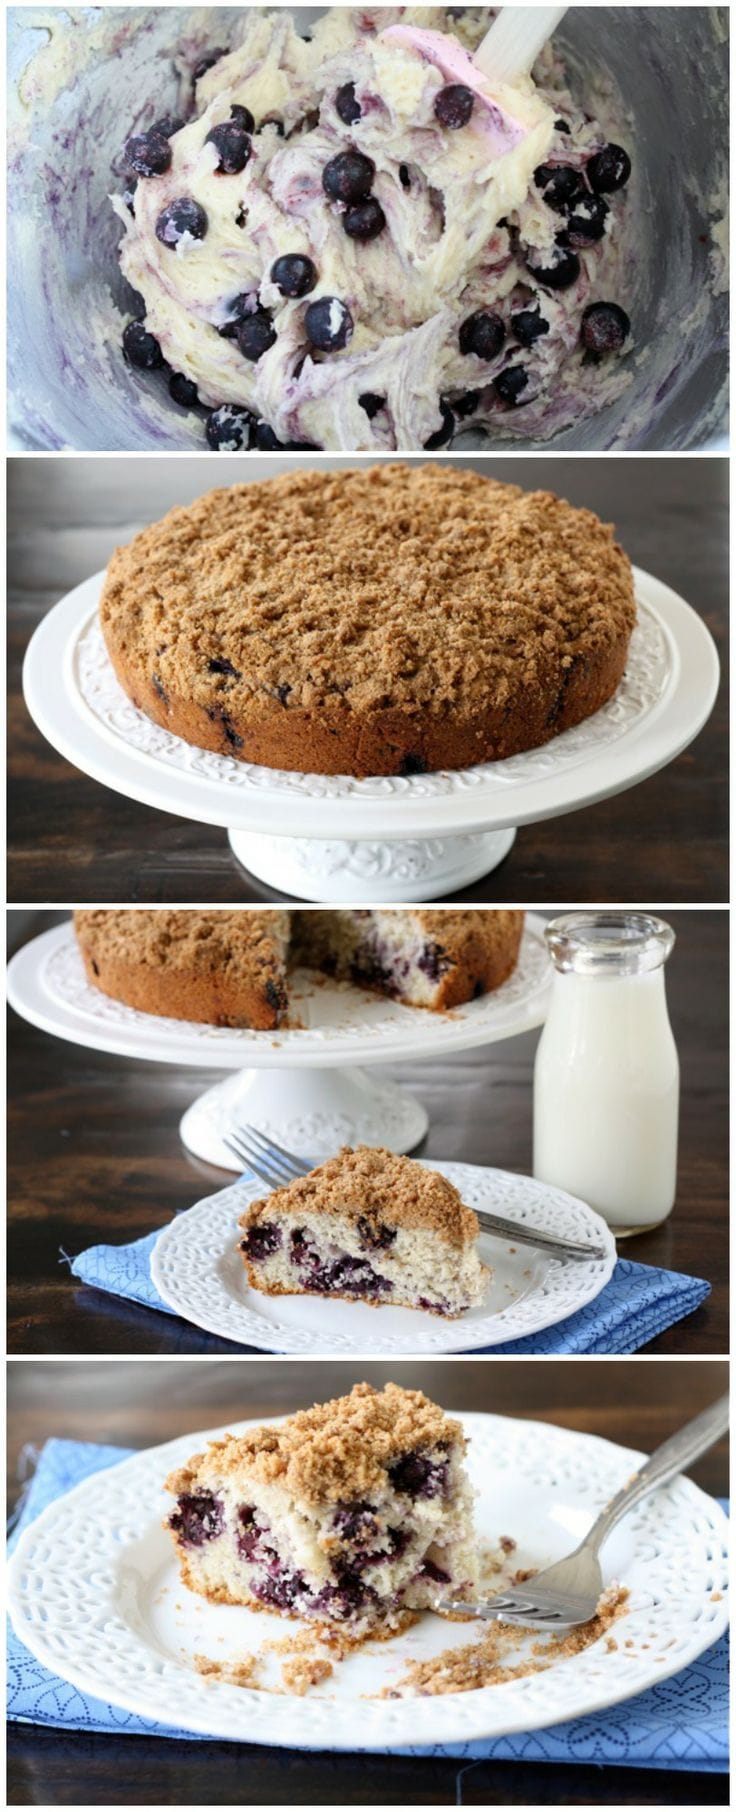 Blueberry Buckle Cake Recipe on twopeasandtheirpod.com This cake is great for breakfast or dessert!